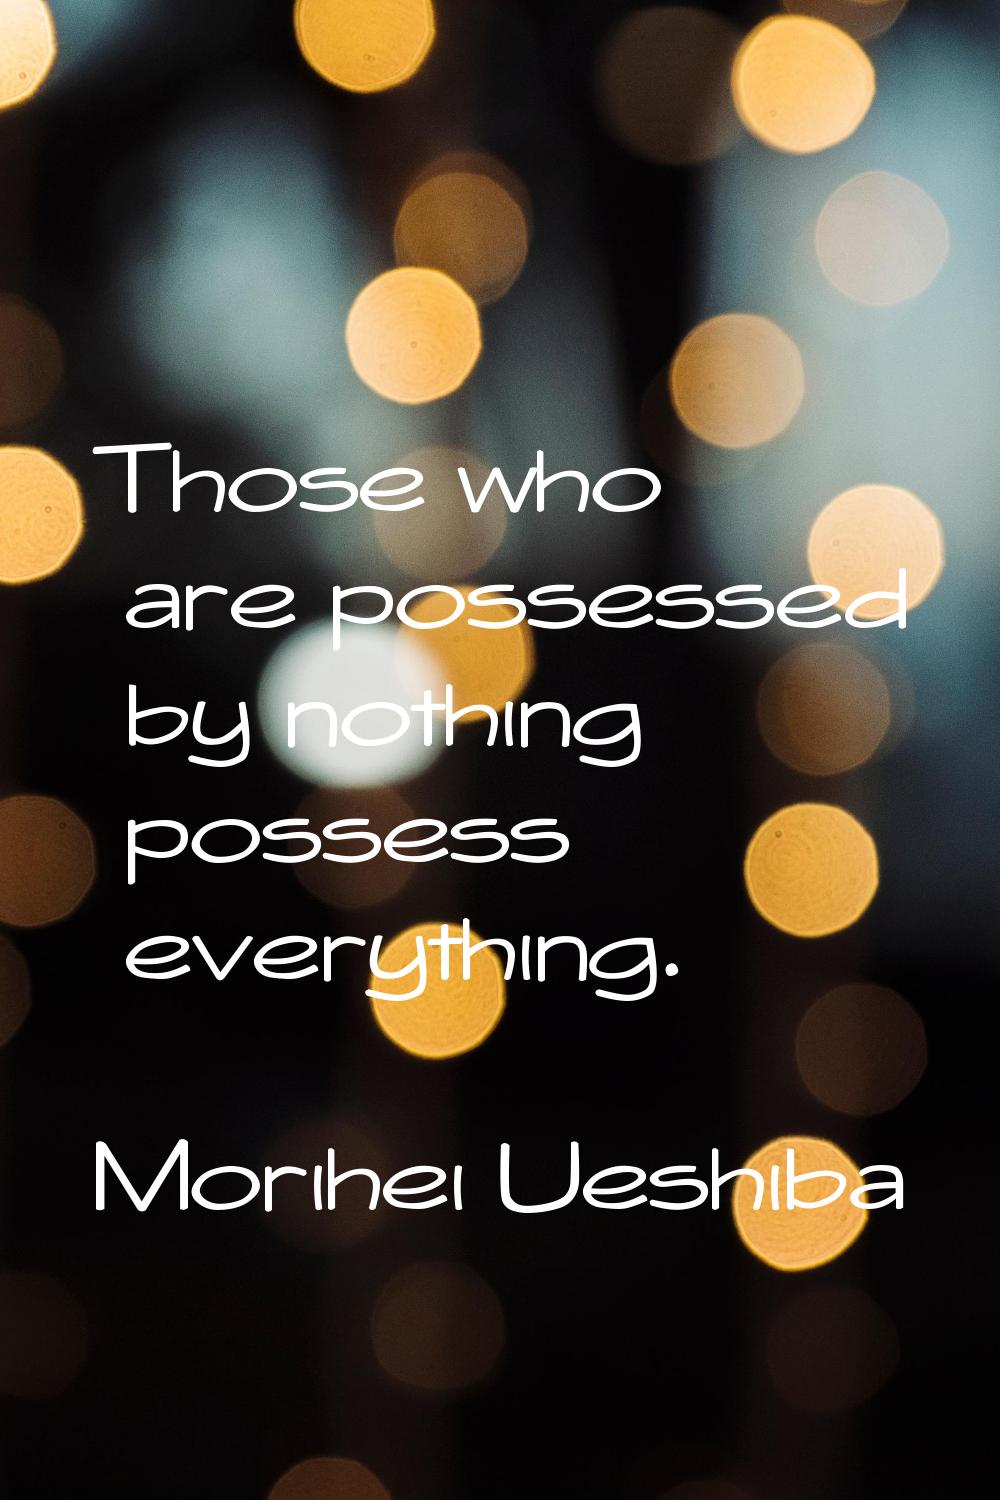 Those who are possessed by nothing possess everything.